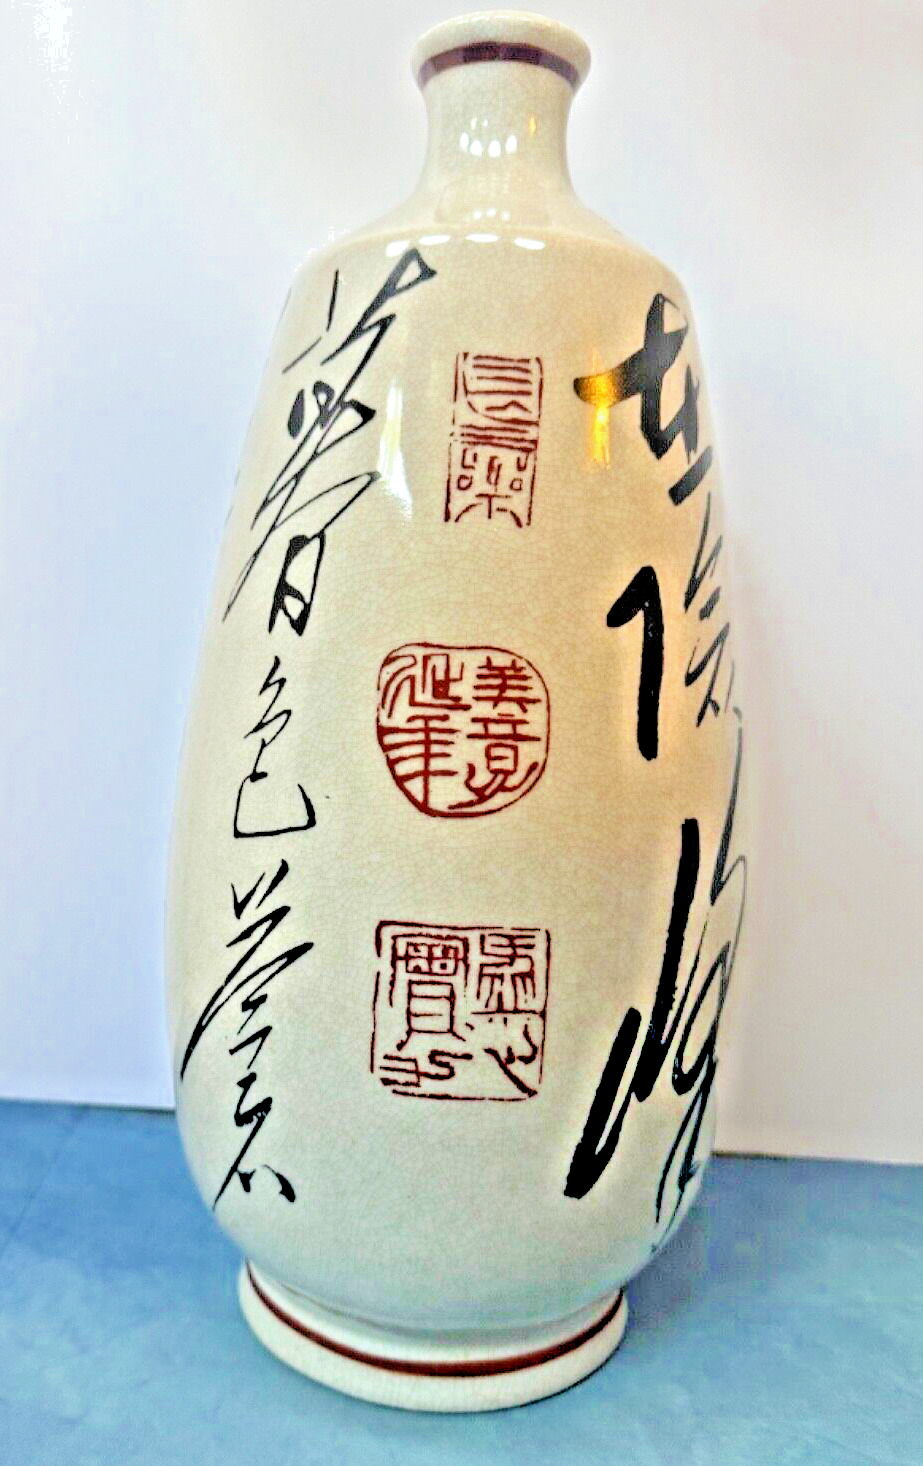 Vintage Chinese Ceramic Vase with Calligraphy and Red Seals Crackle Glaze 14.5\